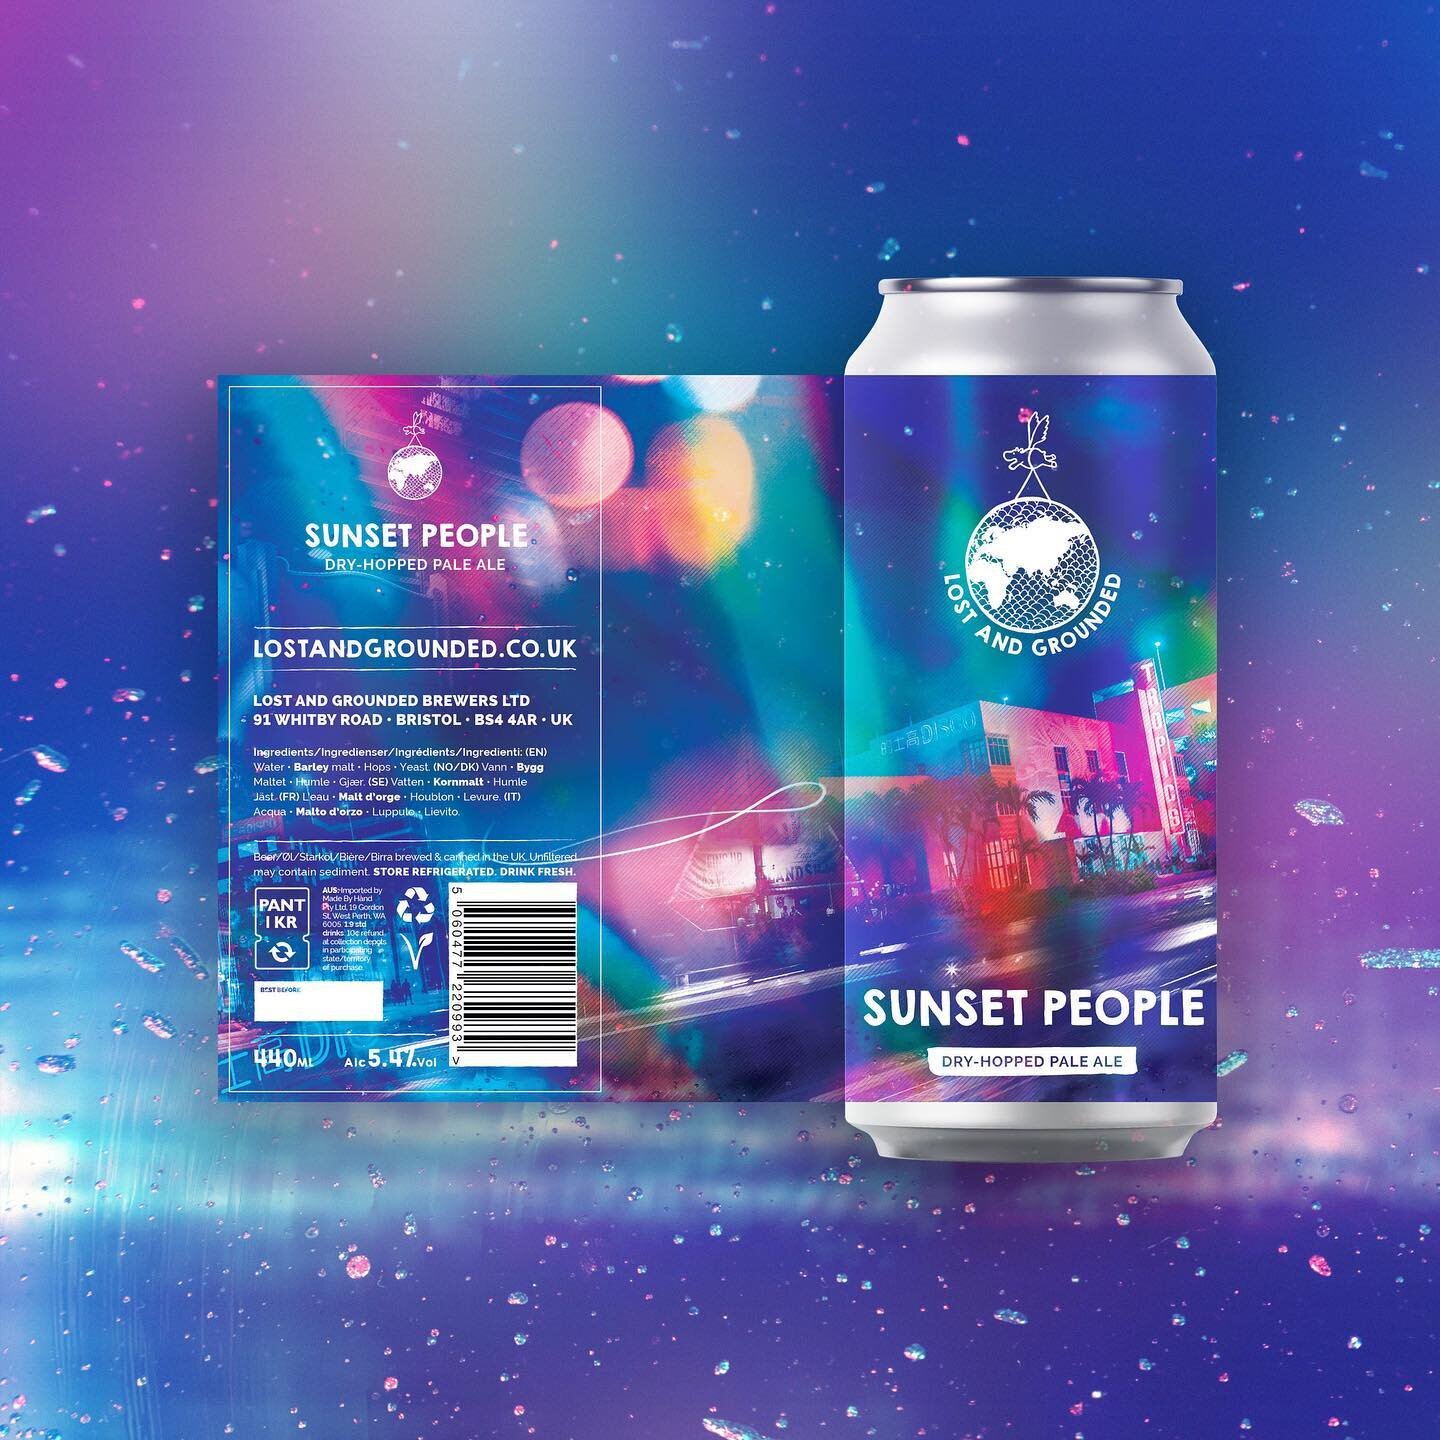 Sunset People / Dry-Hopped Pale Ale. 5.4%. Disco can art for @lostandgroundedbrewers. 🍺 🕺🏿 
-
-
-
-
-
#disco #lights #beer #beers #labeldesign #brewery #packaging #graphicdesign #breweries #label #beerstagram #beerporn #beerdesign #beerart #labela